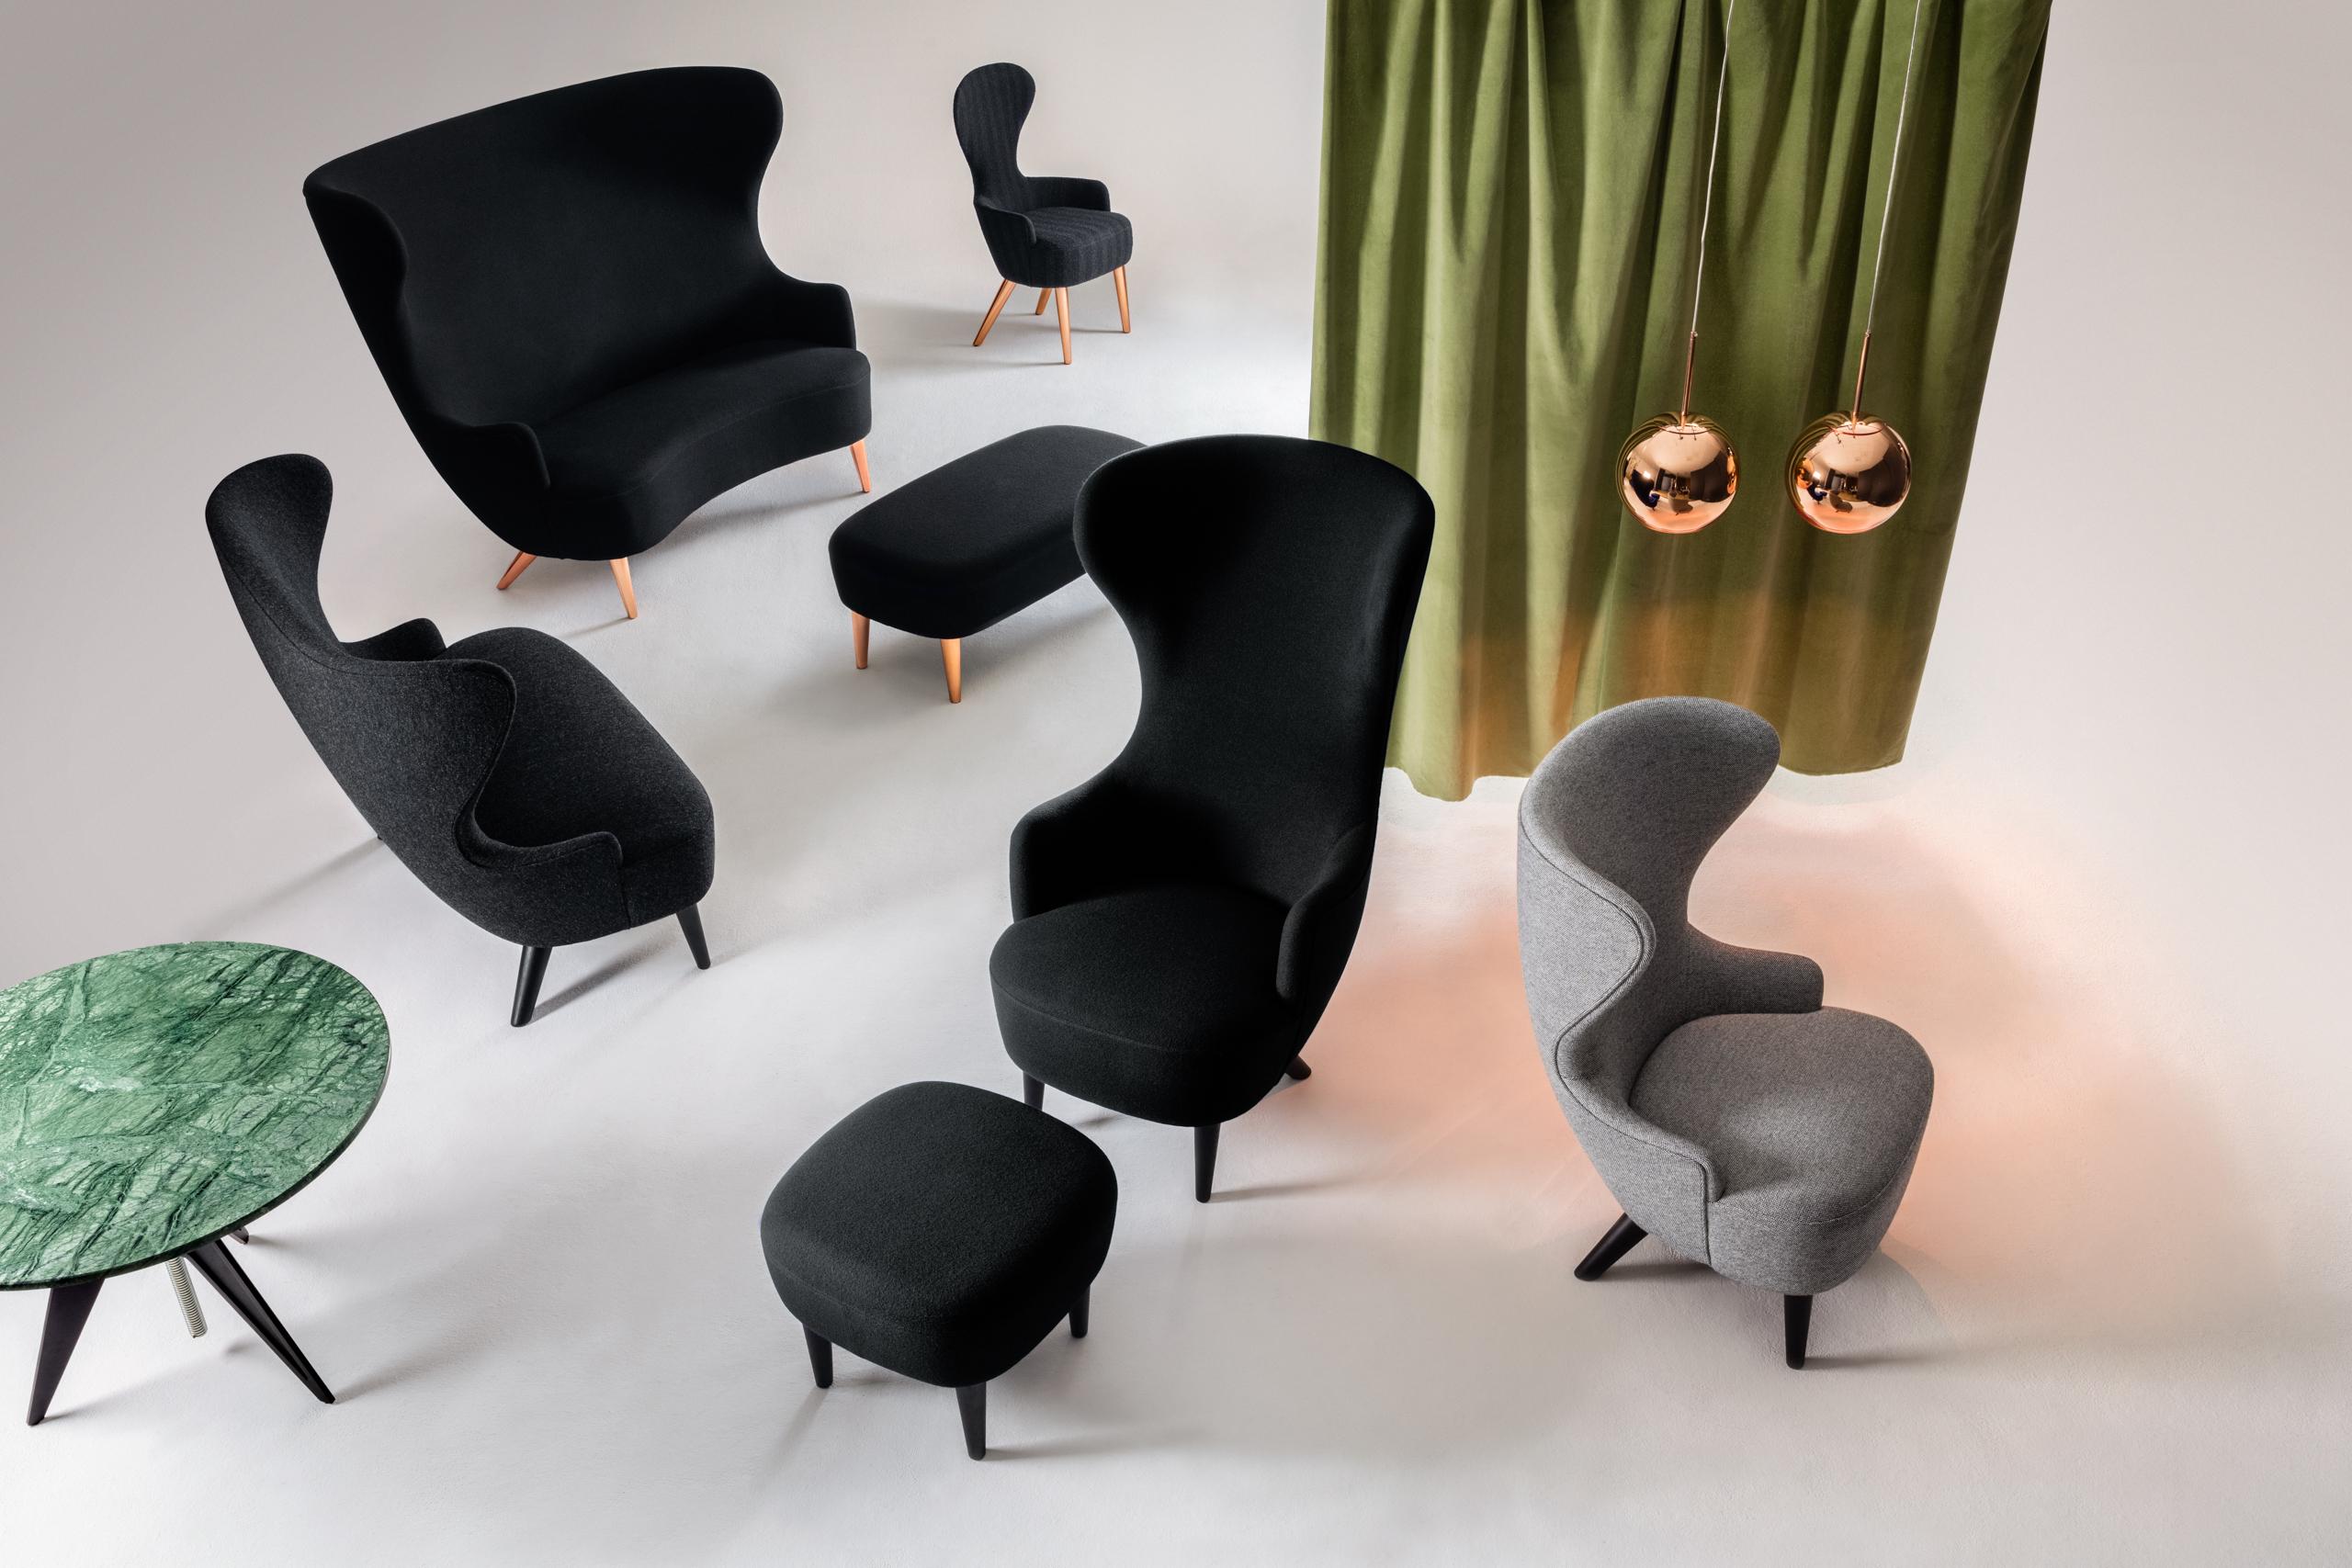 Wingback is a series of British classics re-mastered. The collection includes a chair, a dining chair, sofas and an ottoman. All are available in a wide range of colors and Kvadrat fabrics with chair legs in solid natural or black oak and